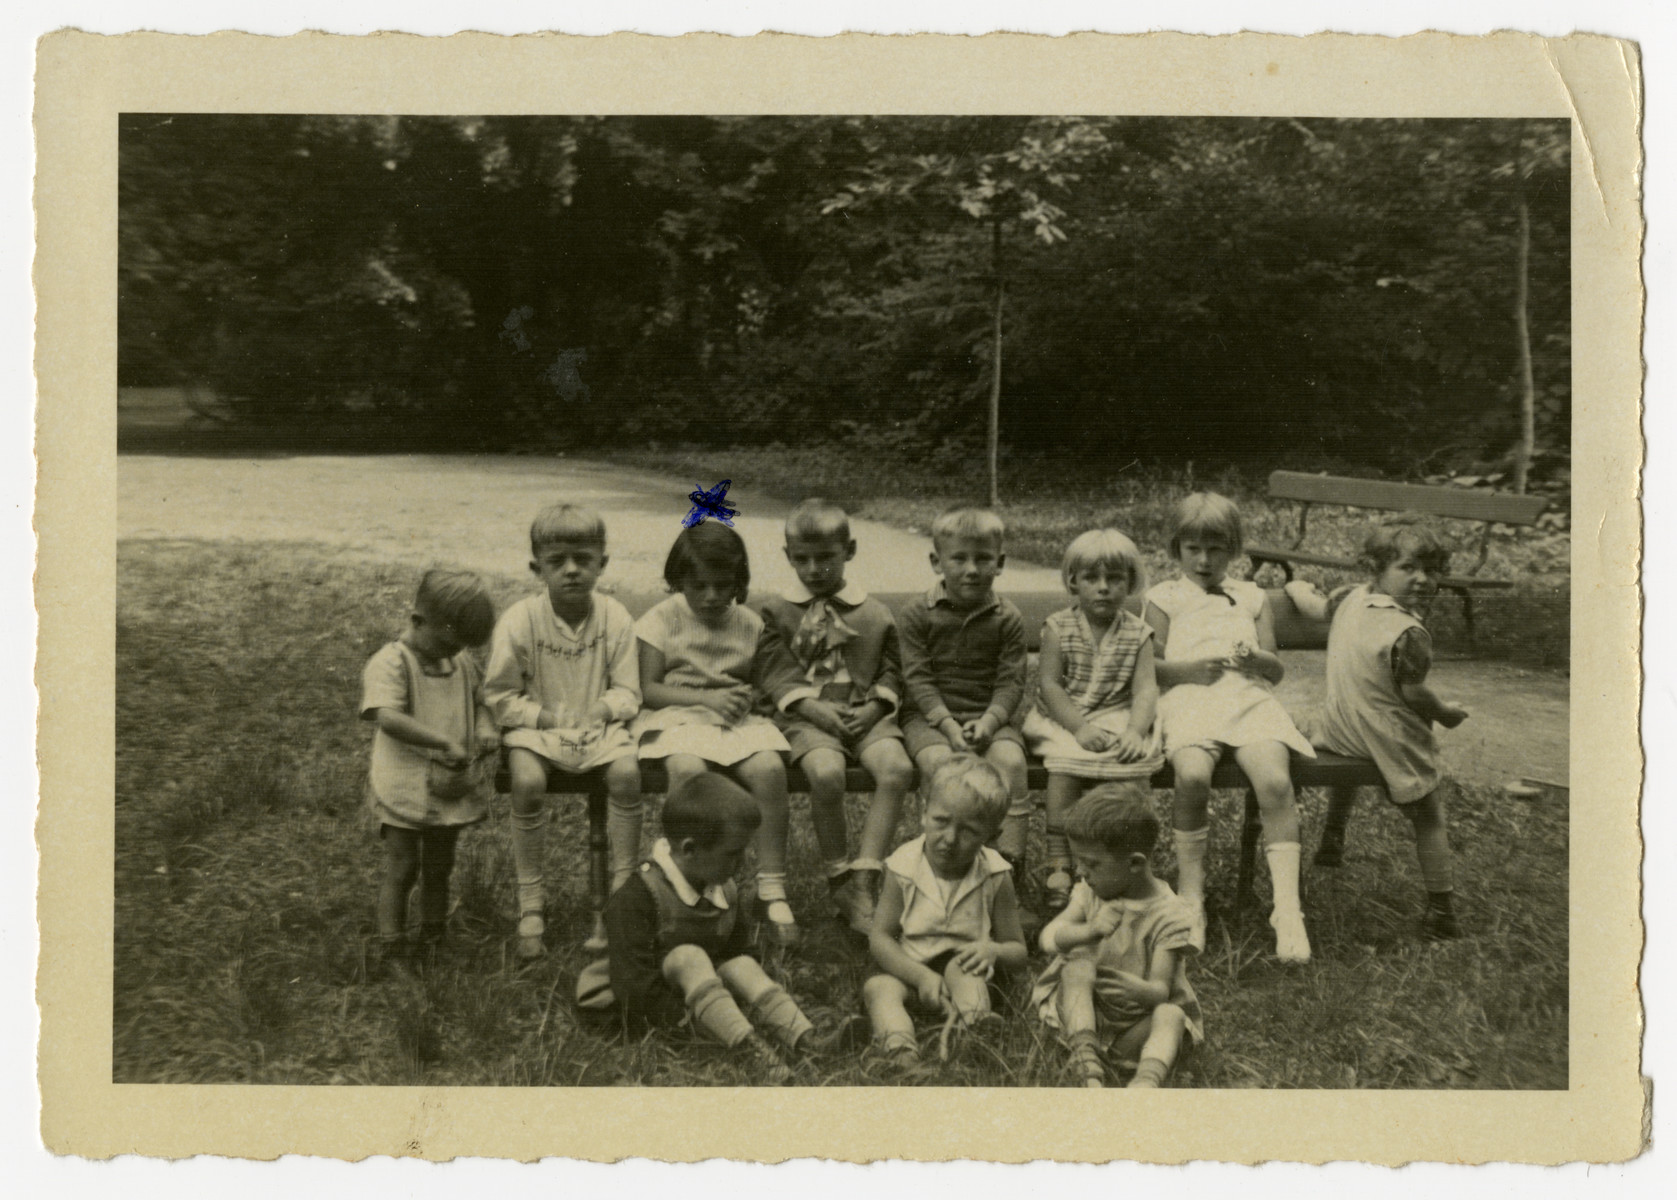 Group portrait of young children in a Catholic kindergarten in Marienberg.

Hilde Loeb, a Jewish child, is pictured seated third from the left.